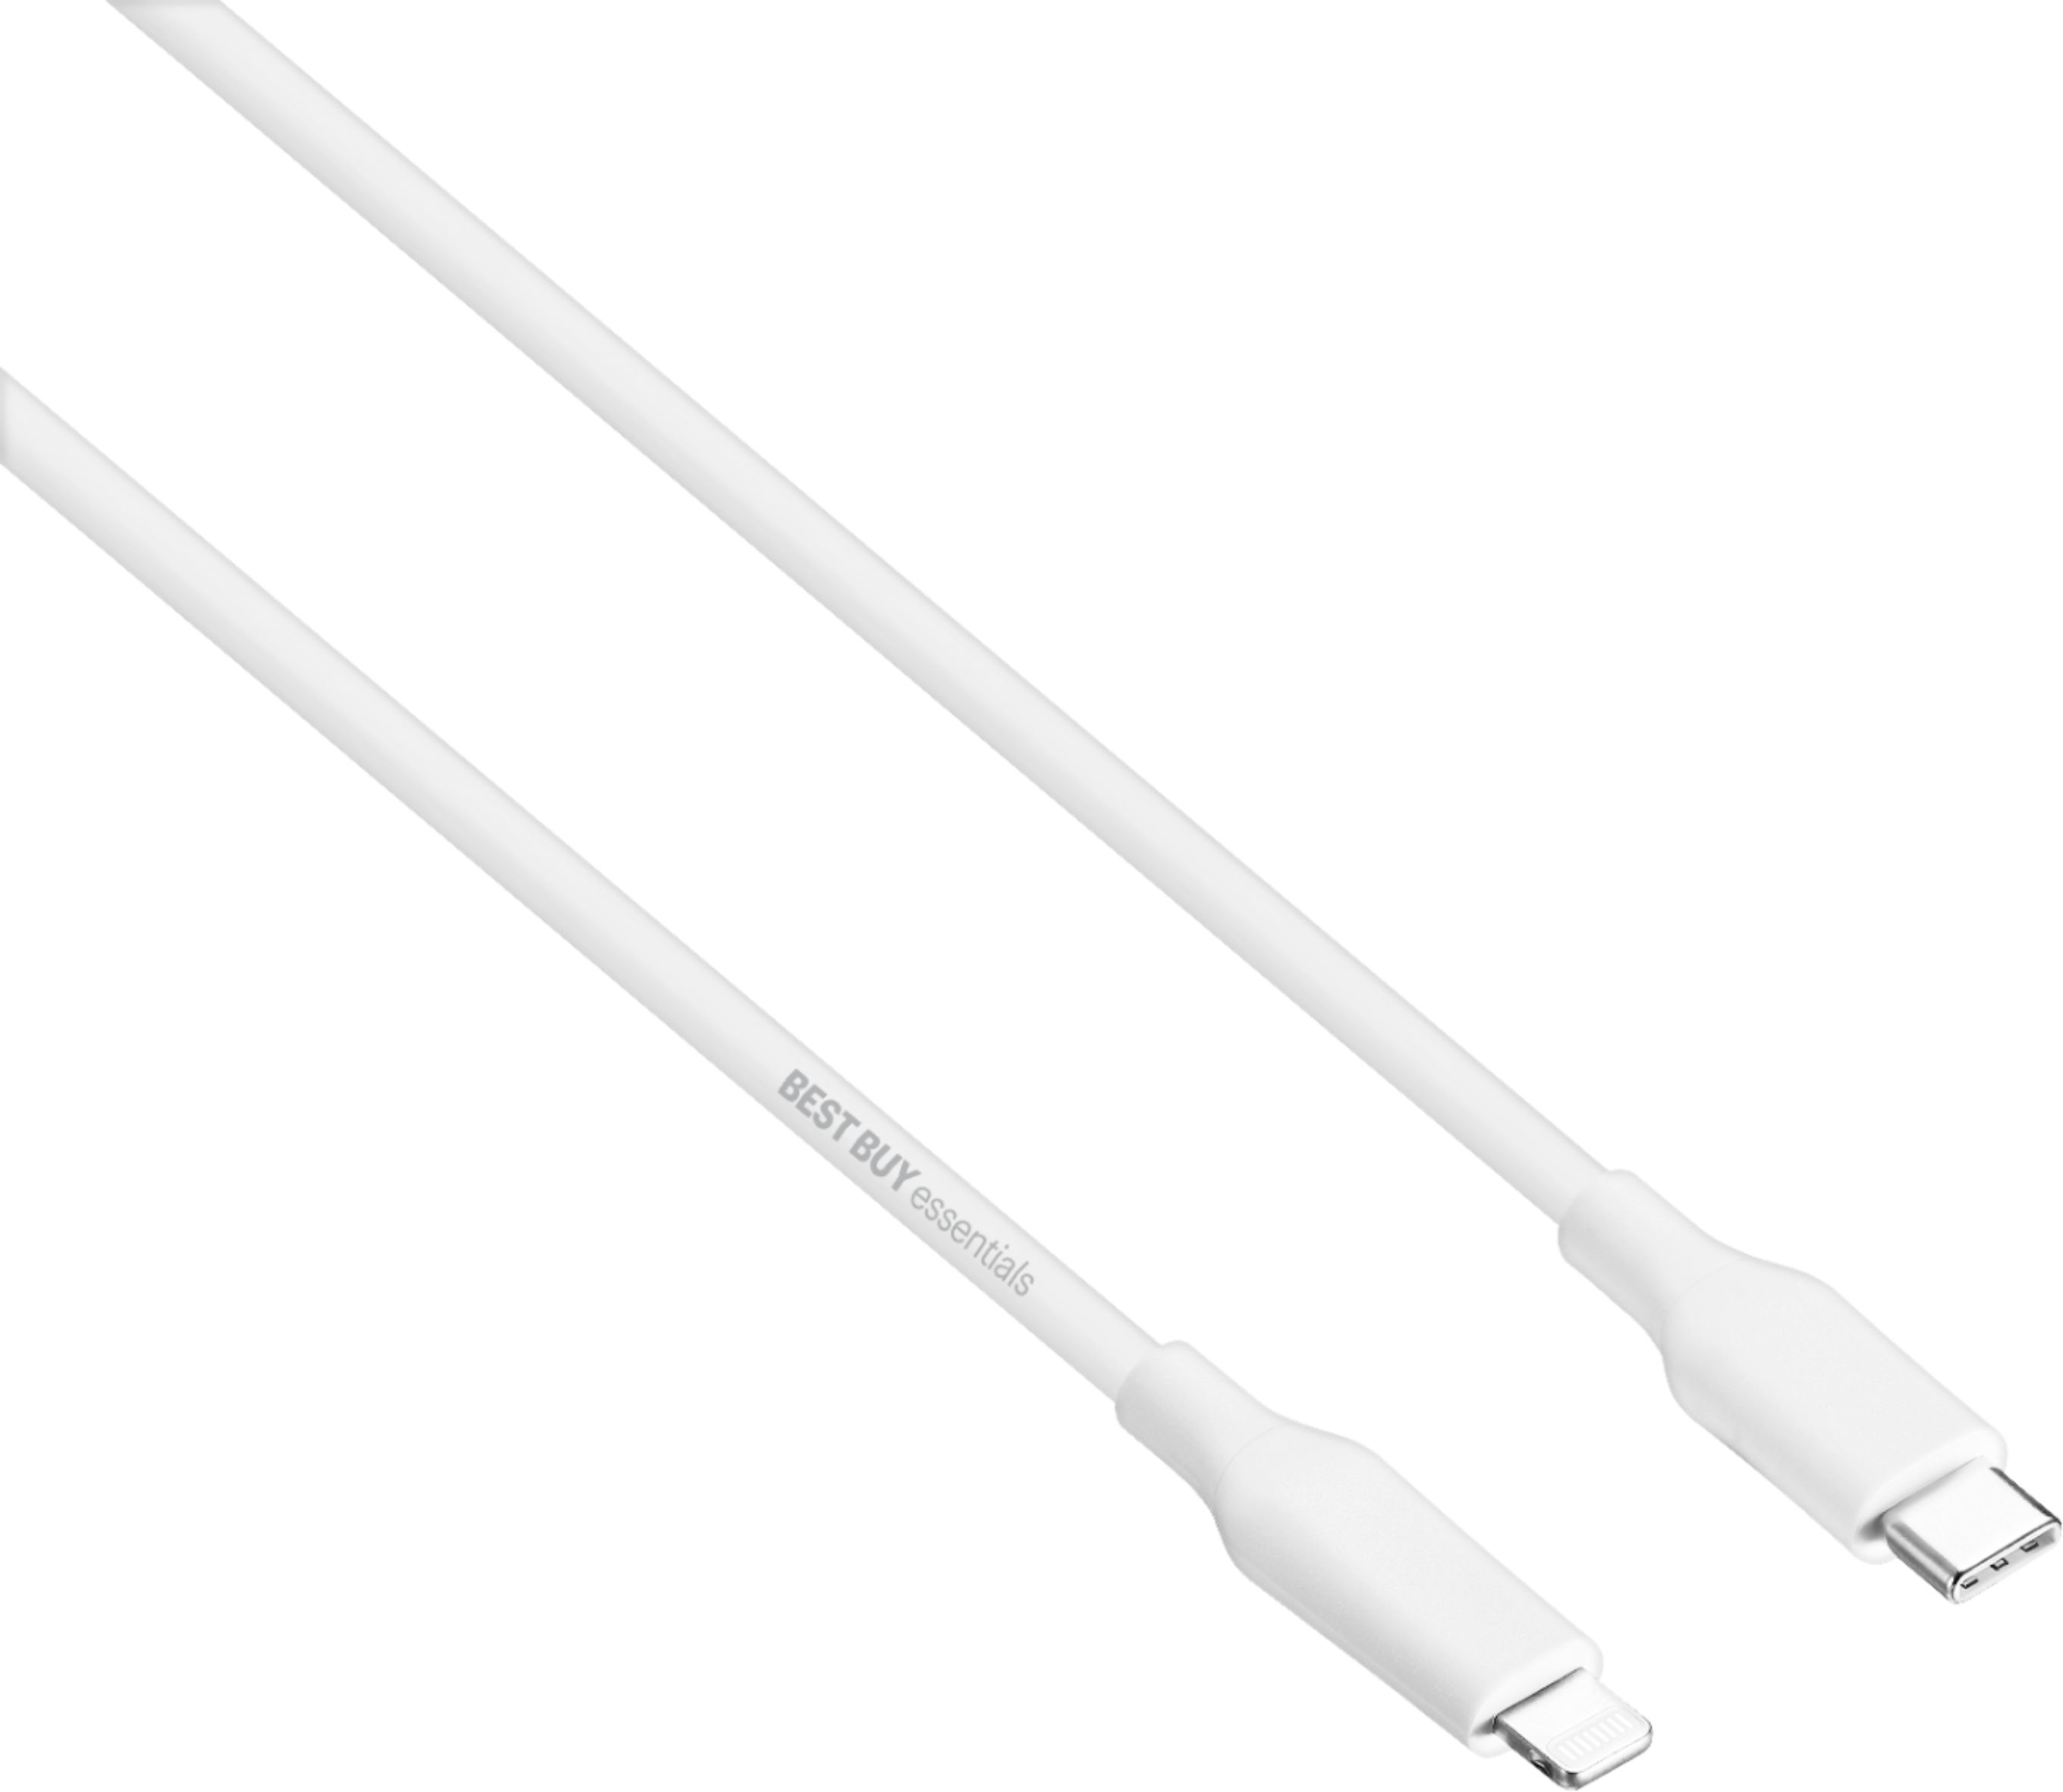 fontein bedenken Renaissance Best Buy essentials™ 9' Lightning to USB-C Charge-and-Sync Cable White  BE-MLC922W - Best Buy